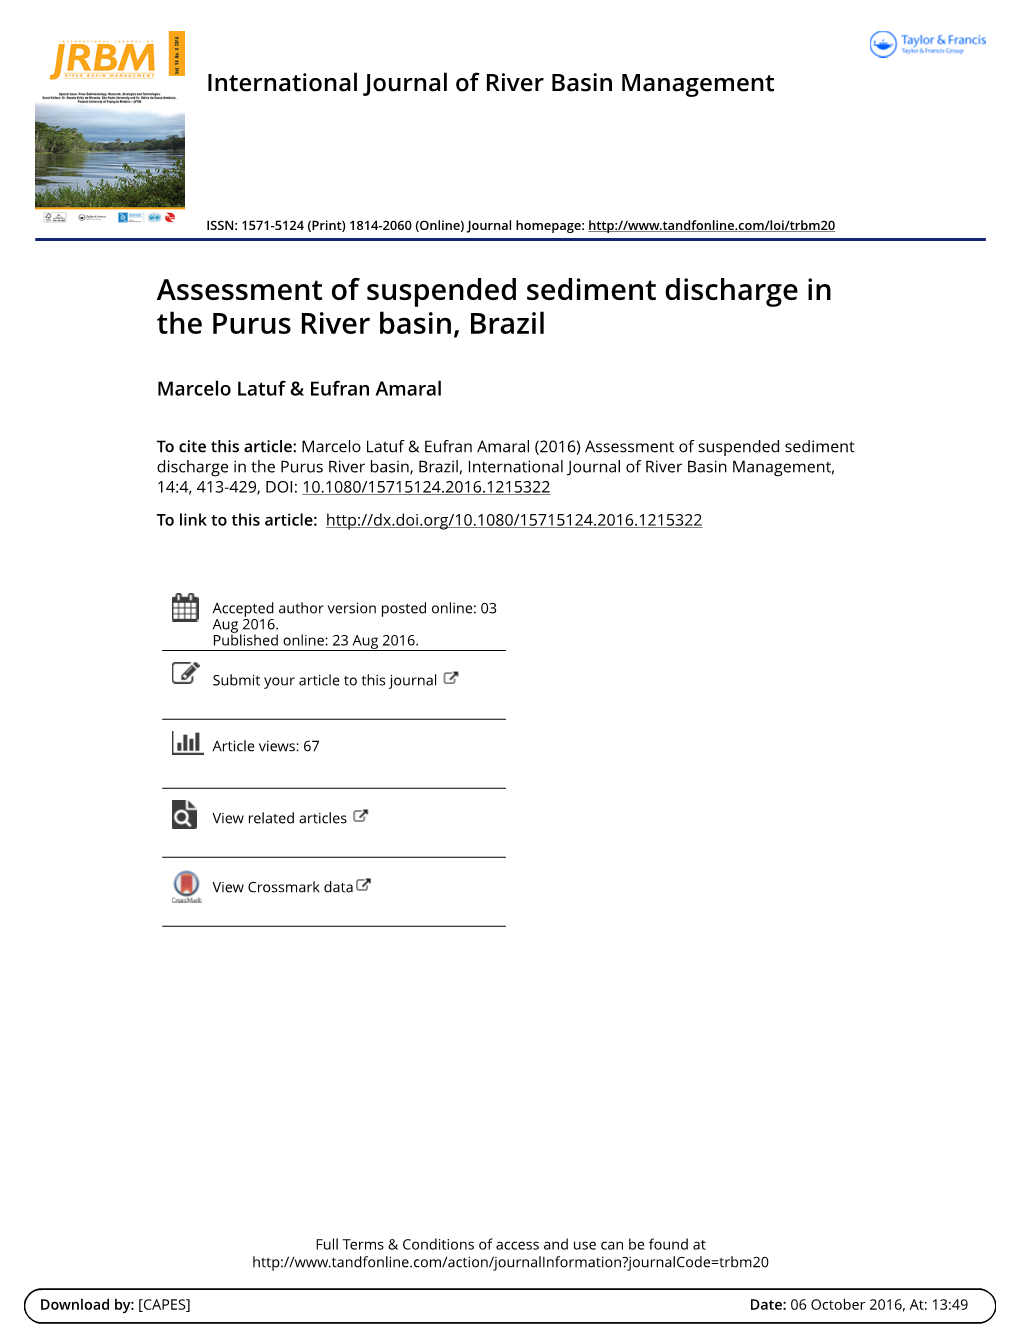 Assessment of Suspended Sediment Discharge in the Purus River Basin, Brazil